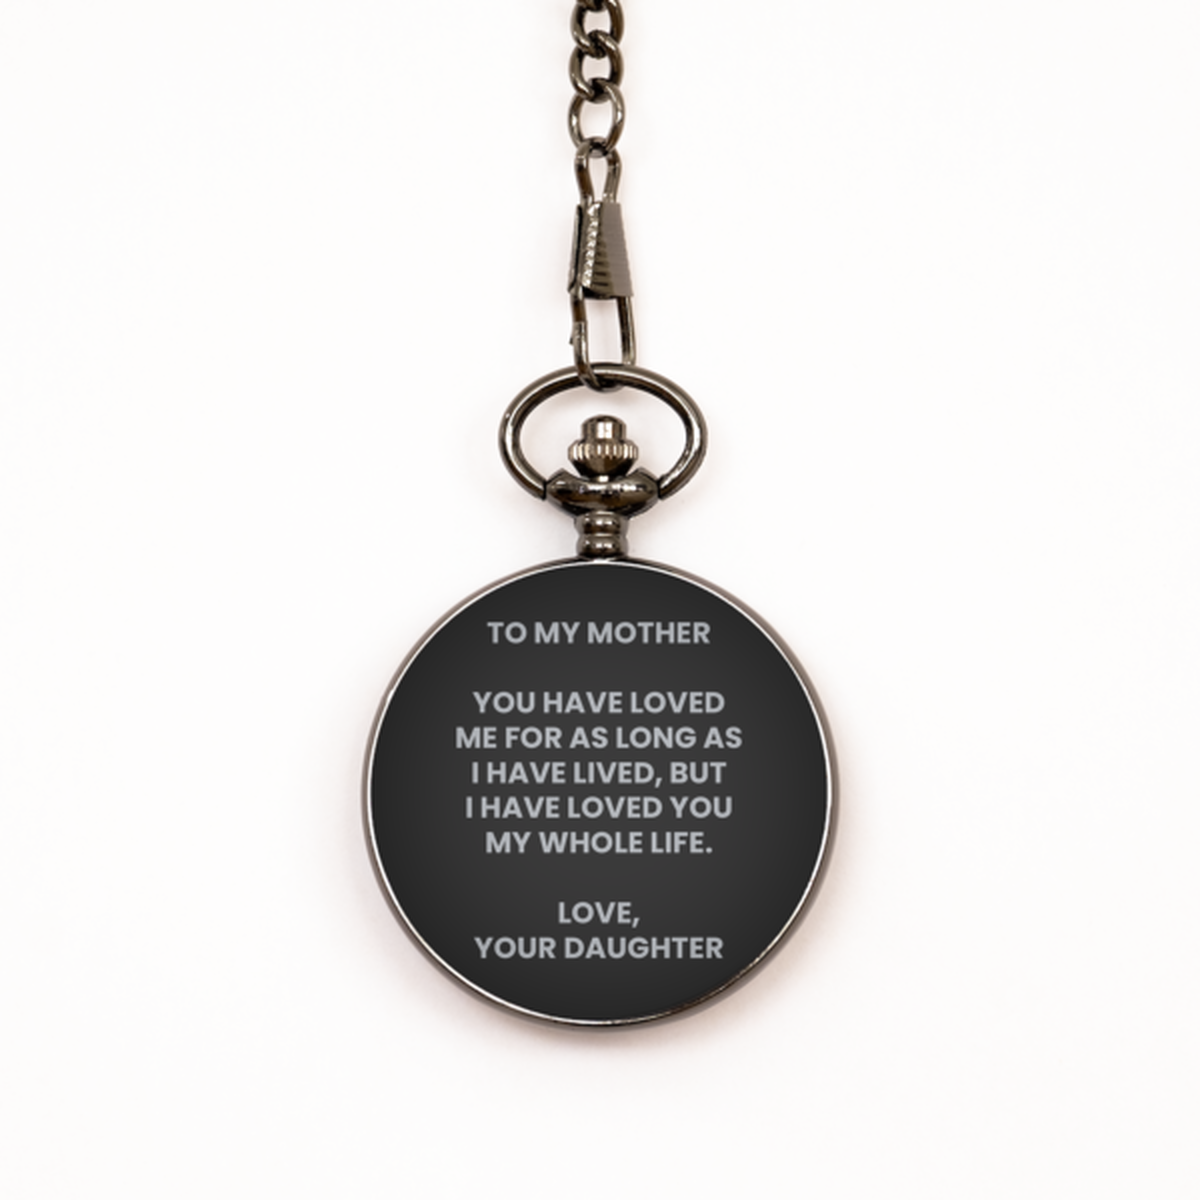 To My Mother Black Pocket Watch, My Whole Life, Mothers Day Gifts For Mother From Daughter, Birthday Gifts For Women